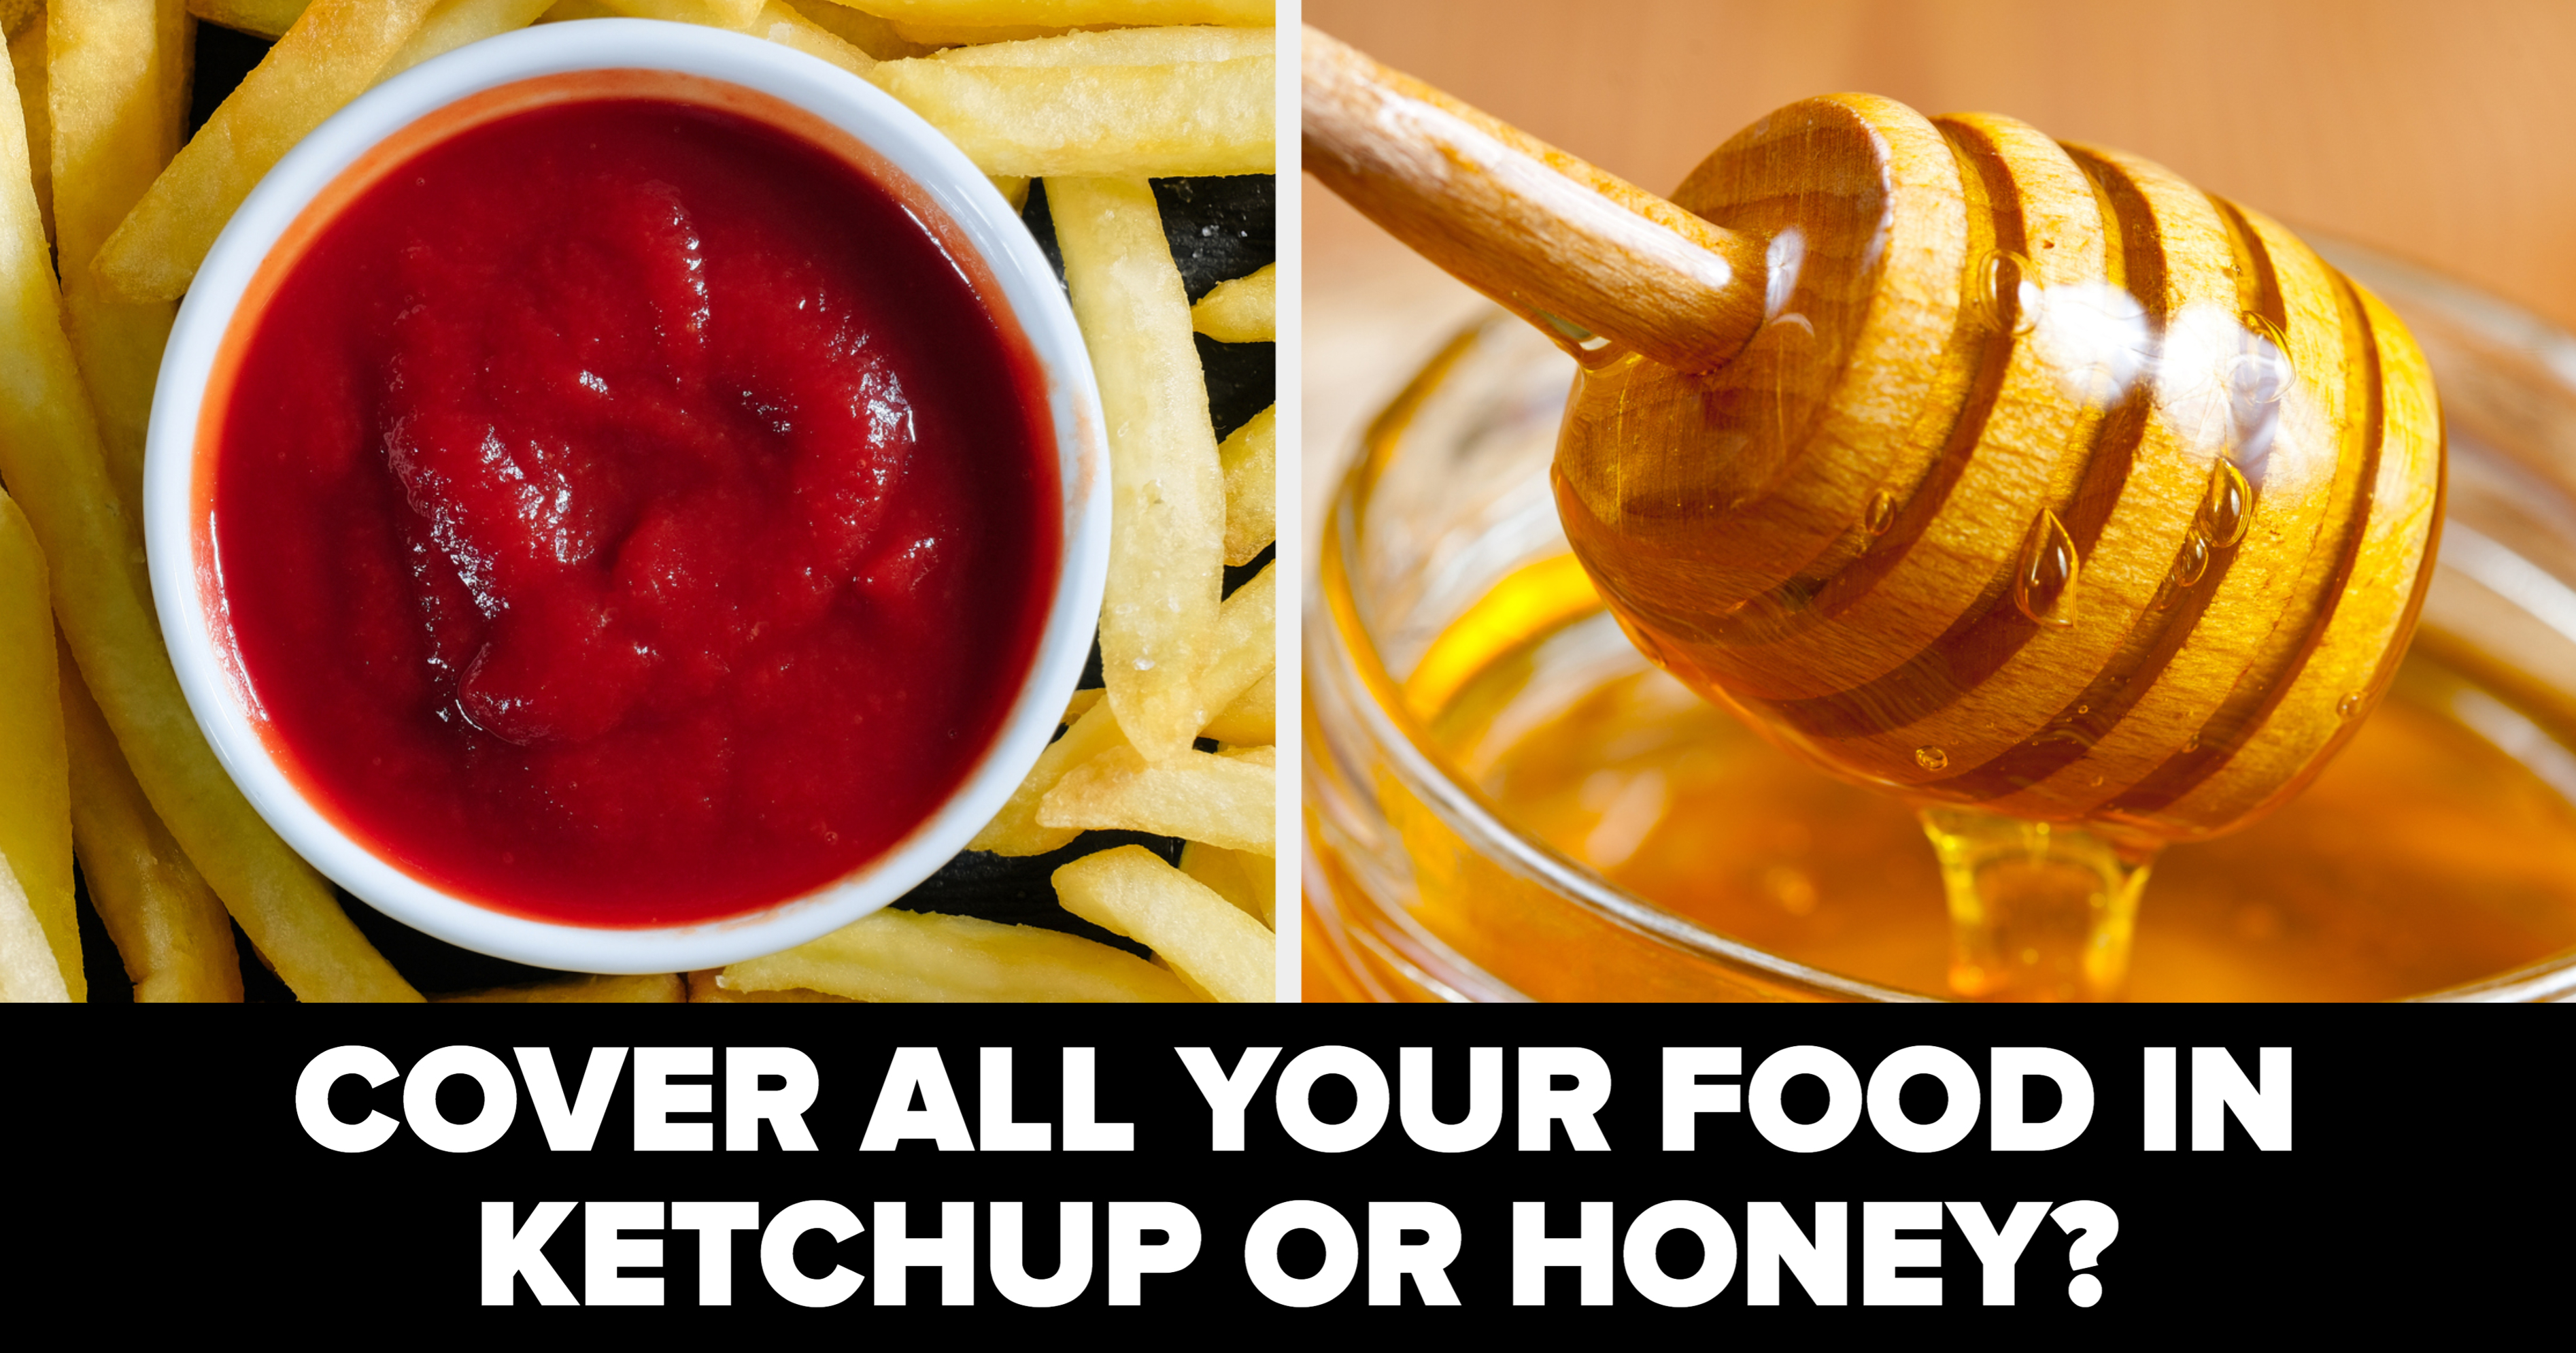 21 of The Hardest Would You Rather Questions We Could Find - CheezCake -  Parenting, Relationships, Food